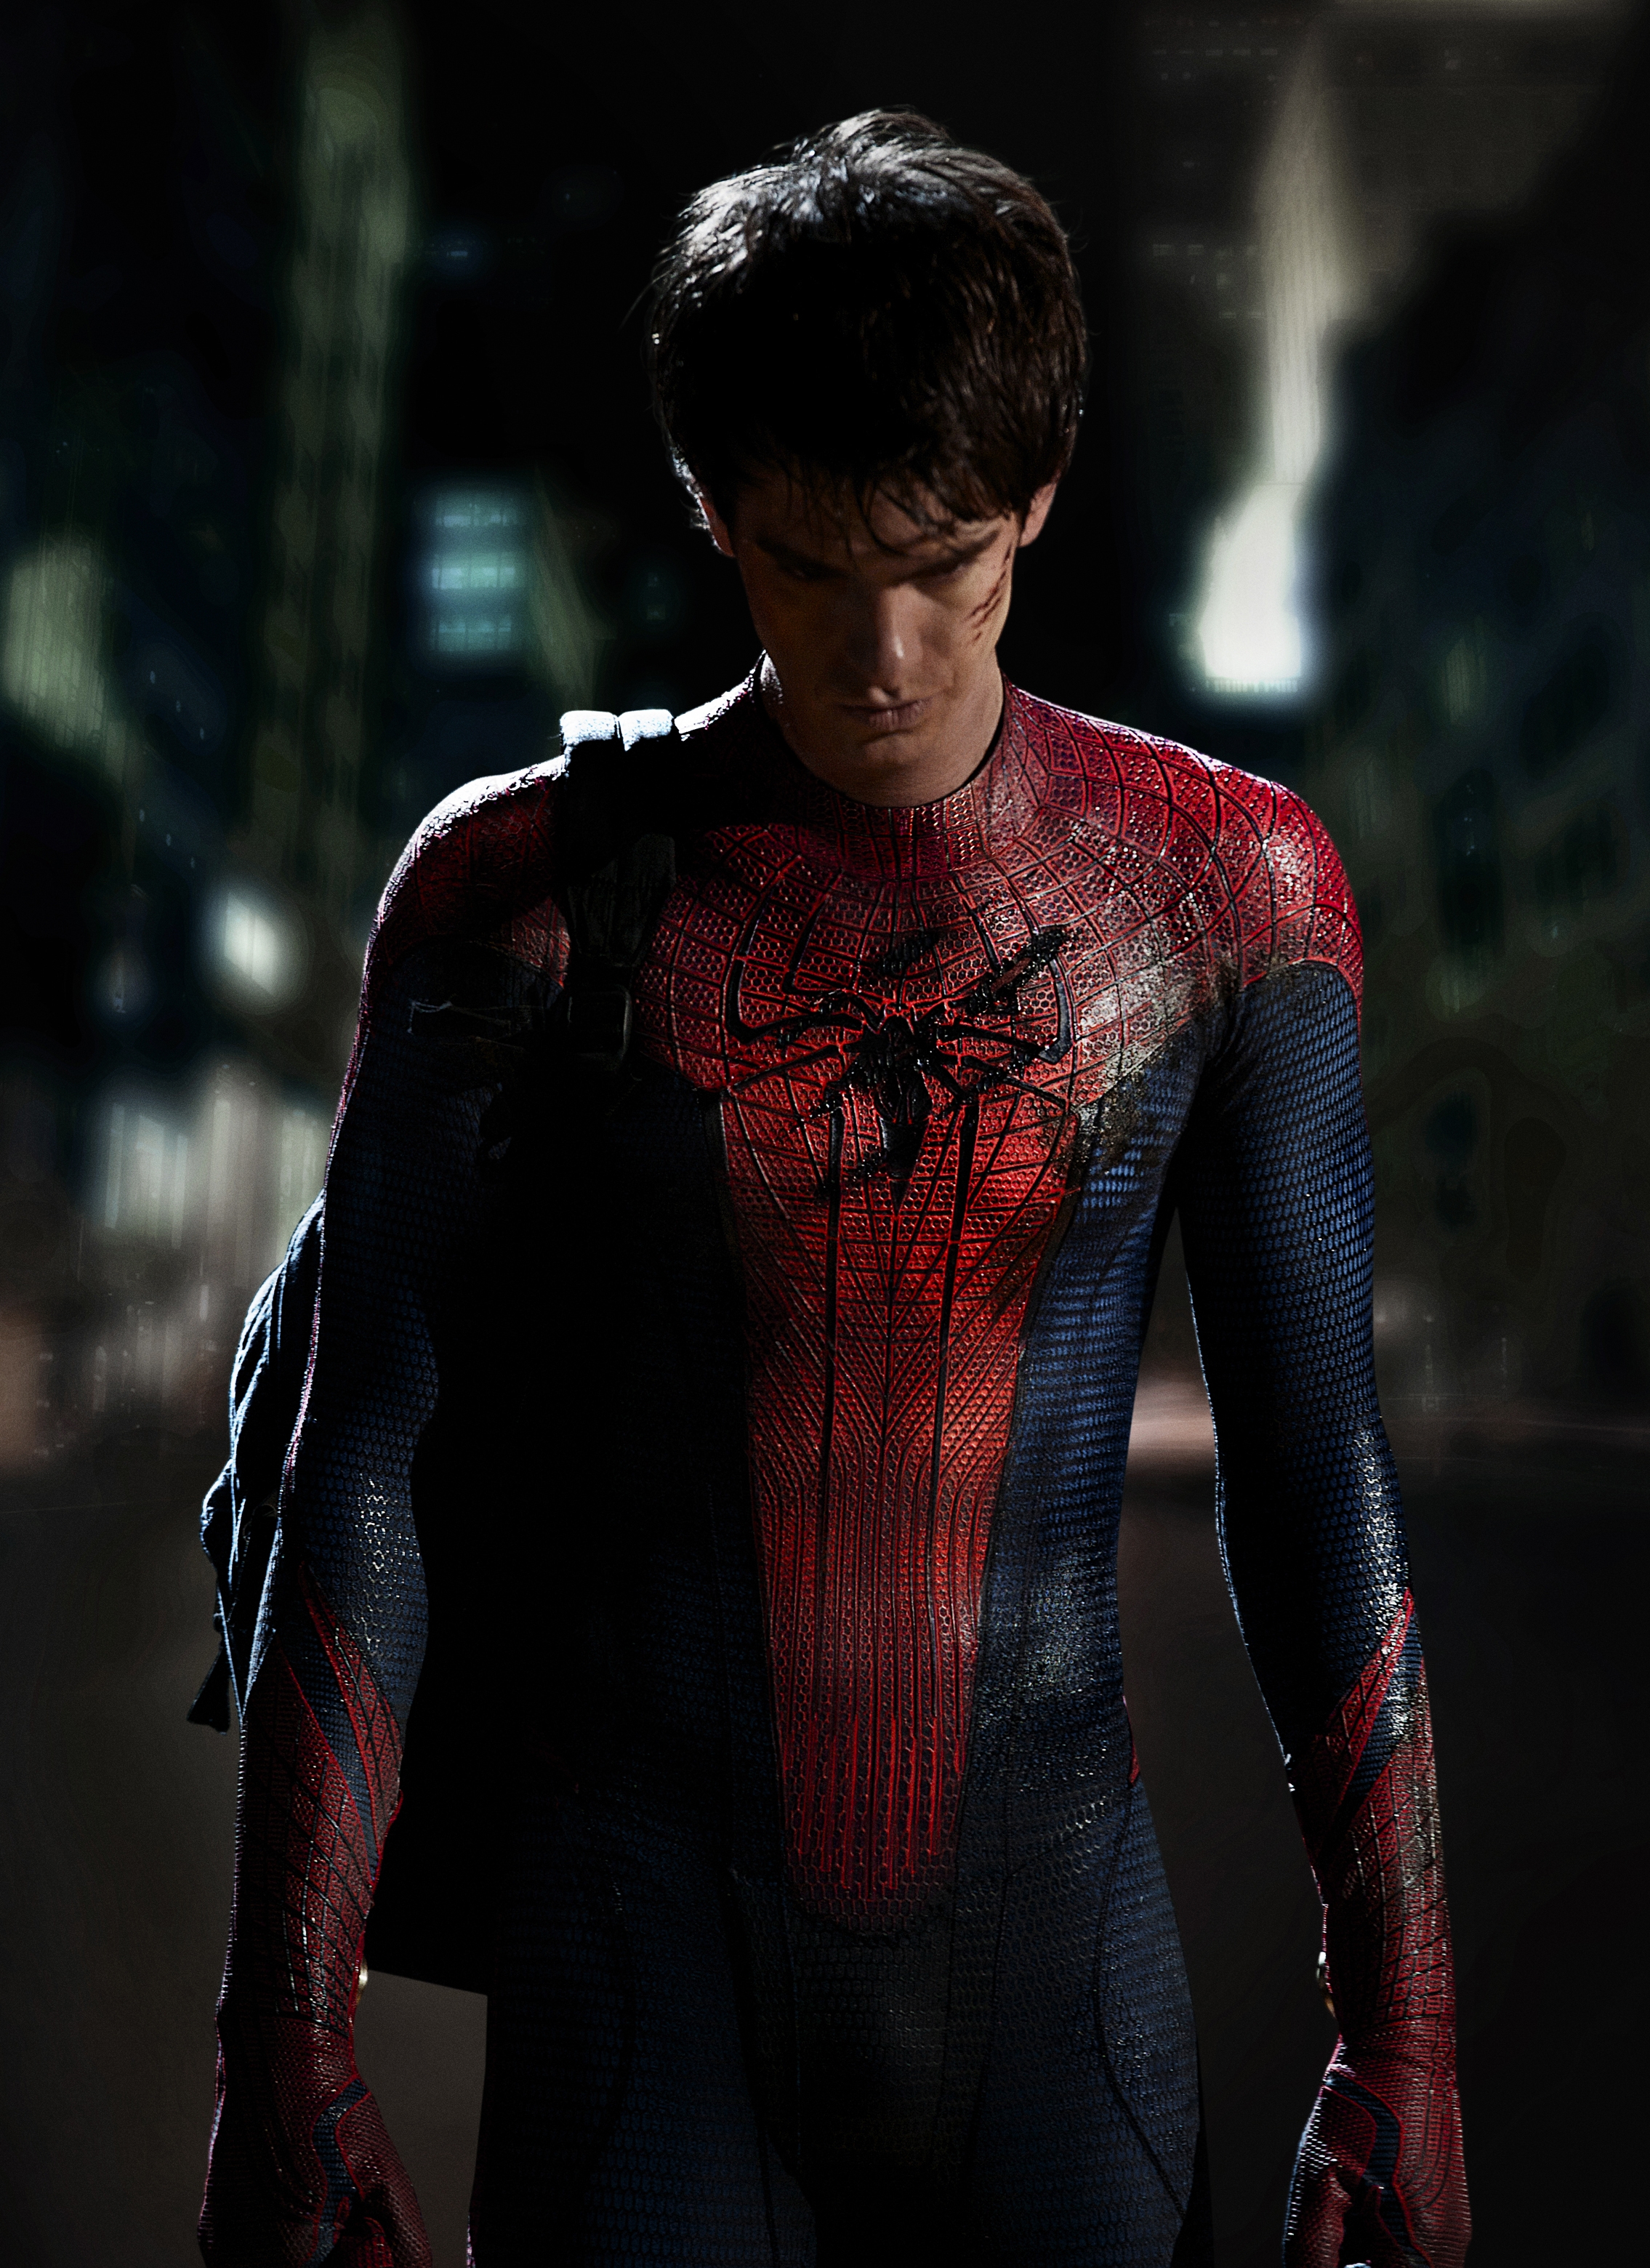 Big Shiny Robot | Early Review from Japan says that “The Amazing Spiderman”  is Indeed, Amazing